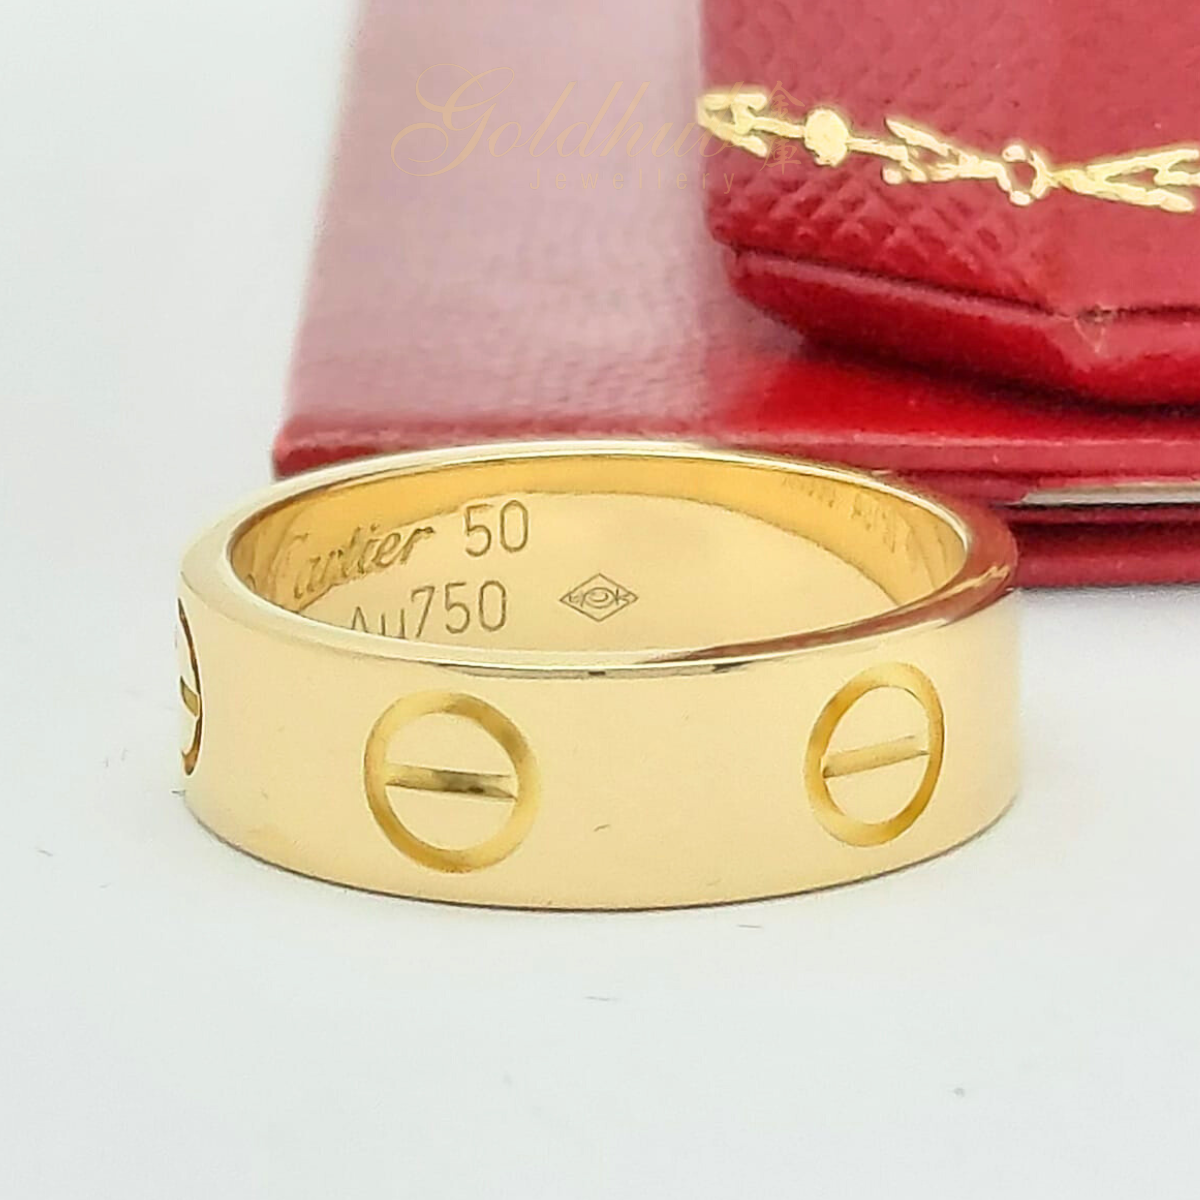 [RELOCATION SALES] 18k Pre-loved Cartier Love Ring in Yellow Gold